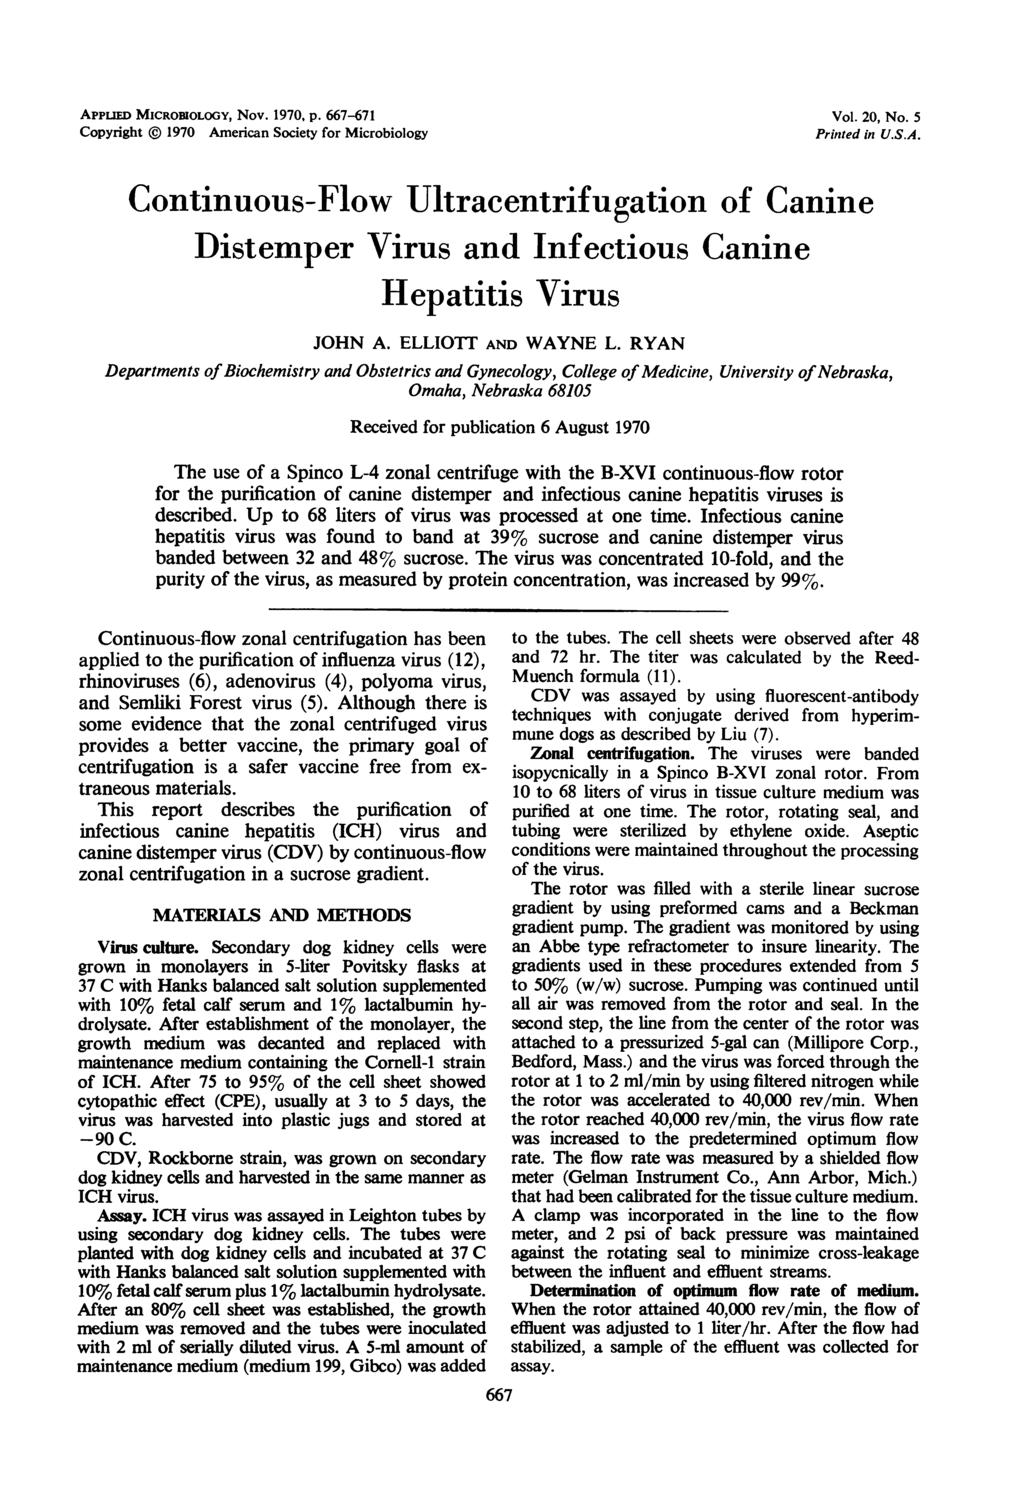 APPr1u MICROBIOLOGY, Nov. 1970, p. 667-671 Copyright 1970 American Society for Microbiology Vol. 20, No. 5 Printed in U.S.A. Continuous-Flow Ultracentrifugation of Canine Distemper Virus and Infectious Canine Hepatitis Virus JOHN A.